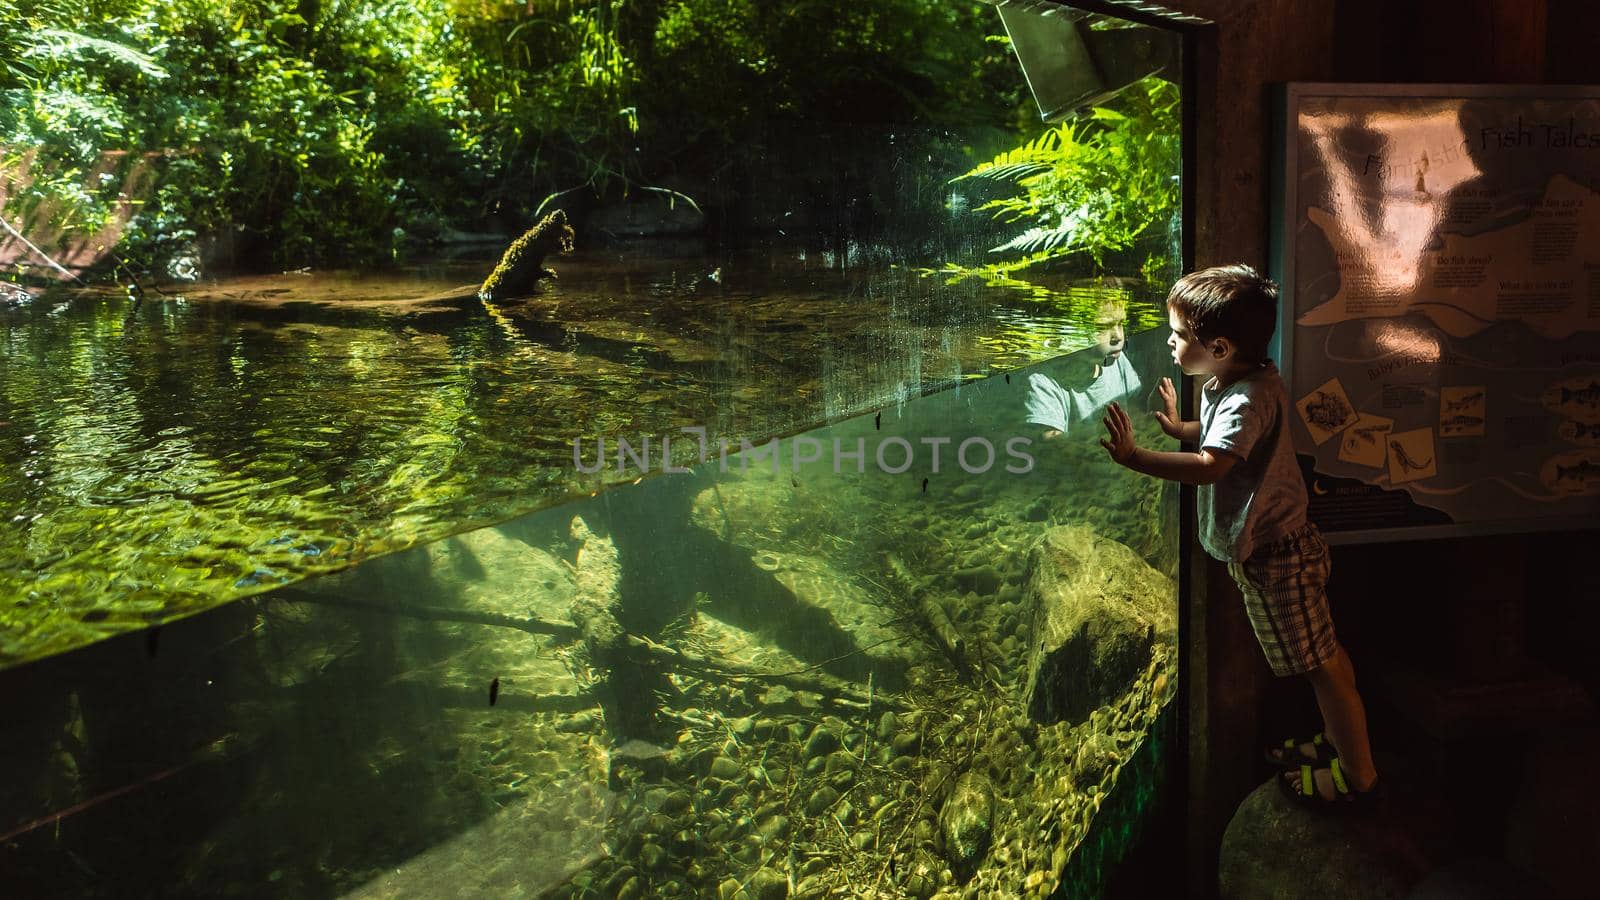 PORTLAND, OR - July 4, 2018: Little boy at Underground stream viewing station at Wildwood Recreation site near Portland, Oregon